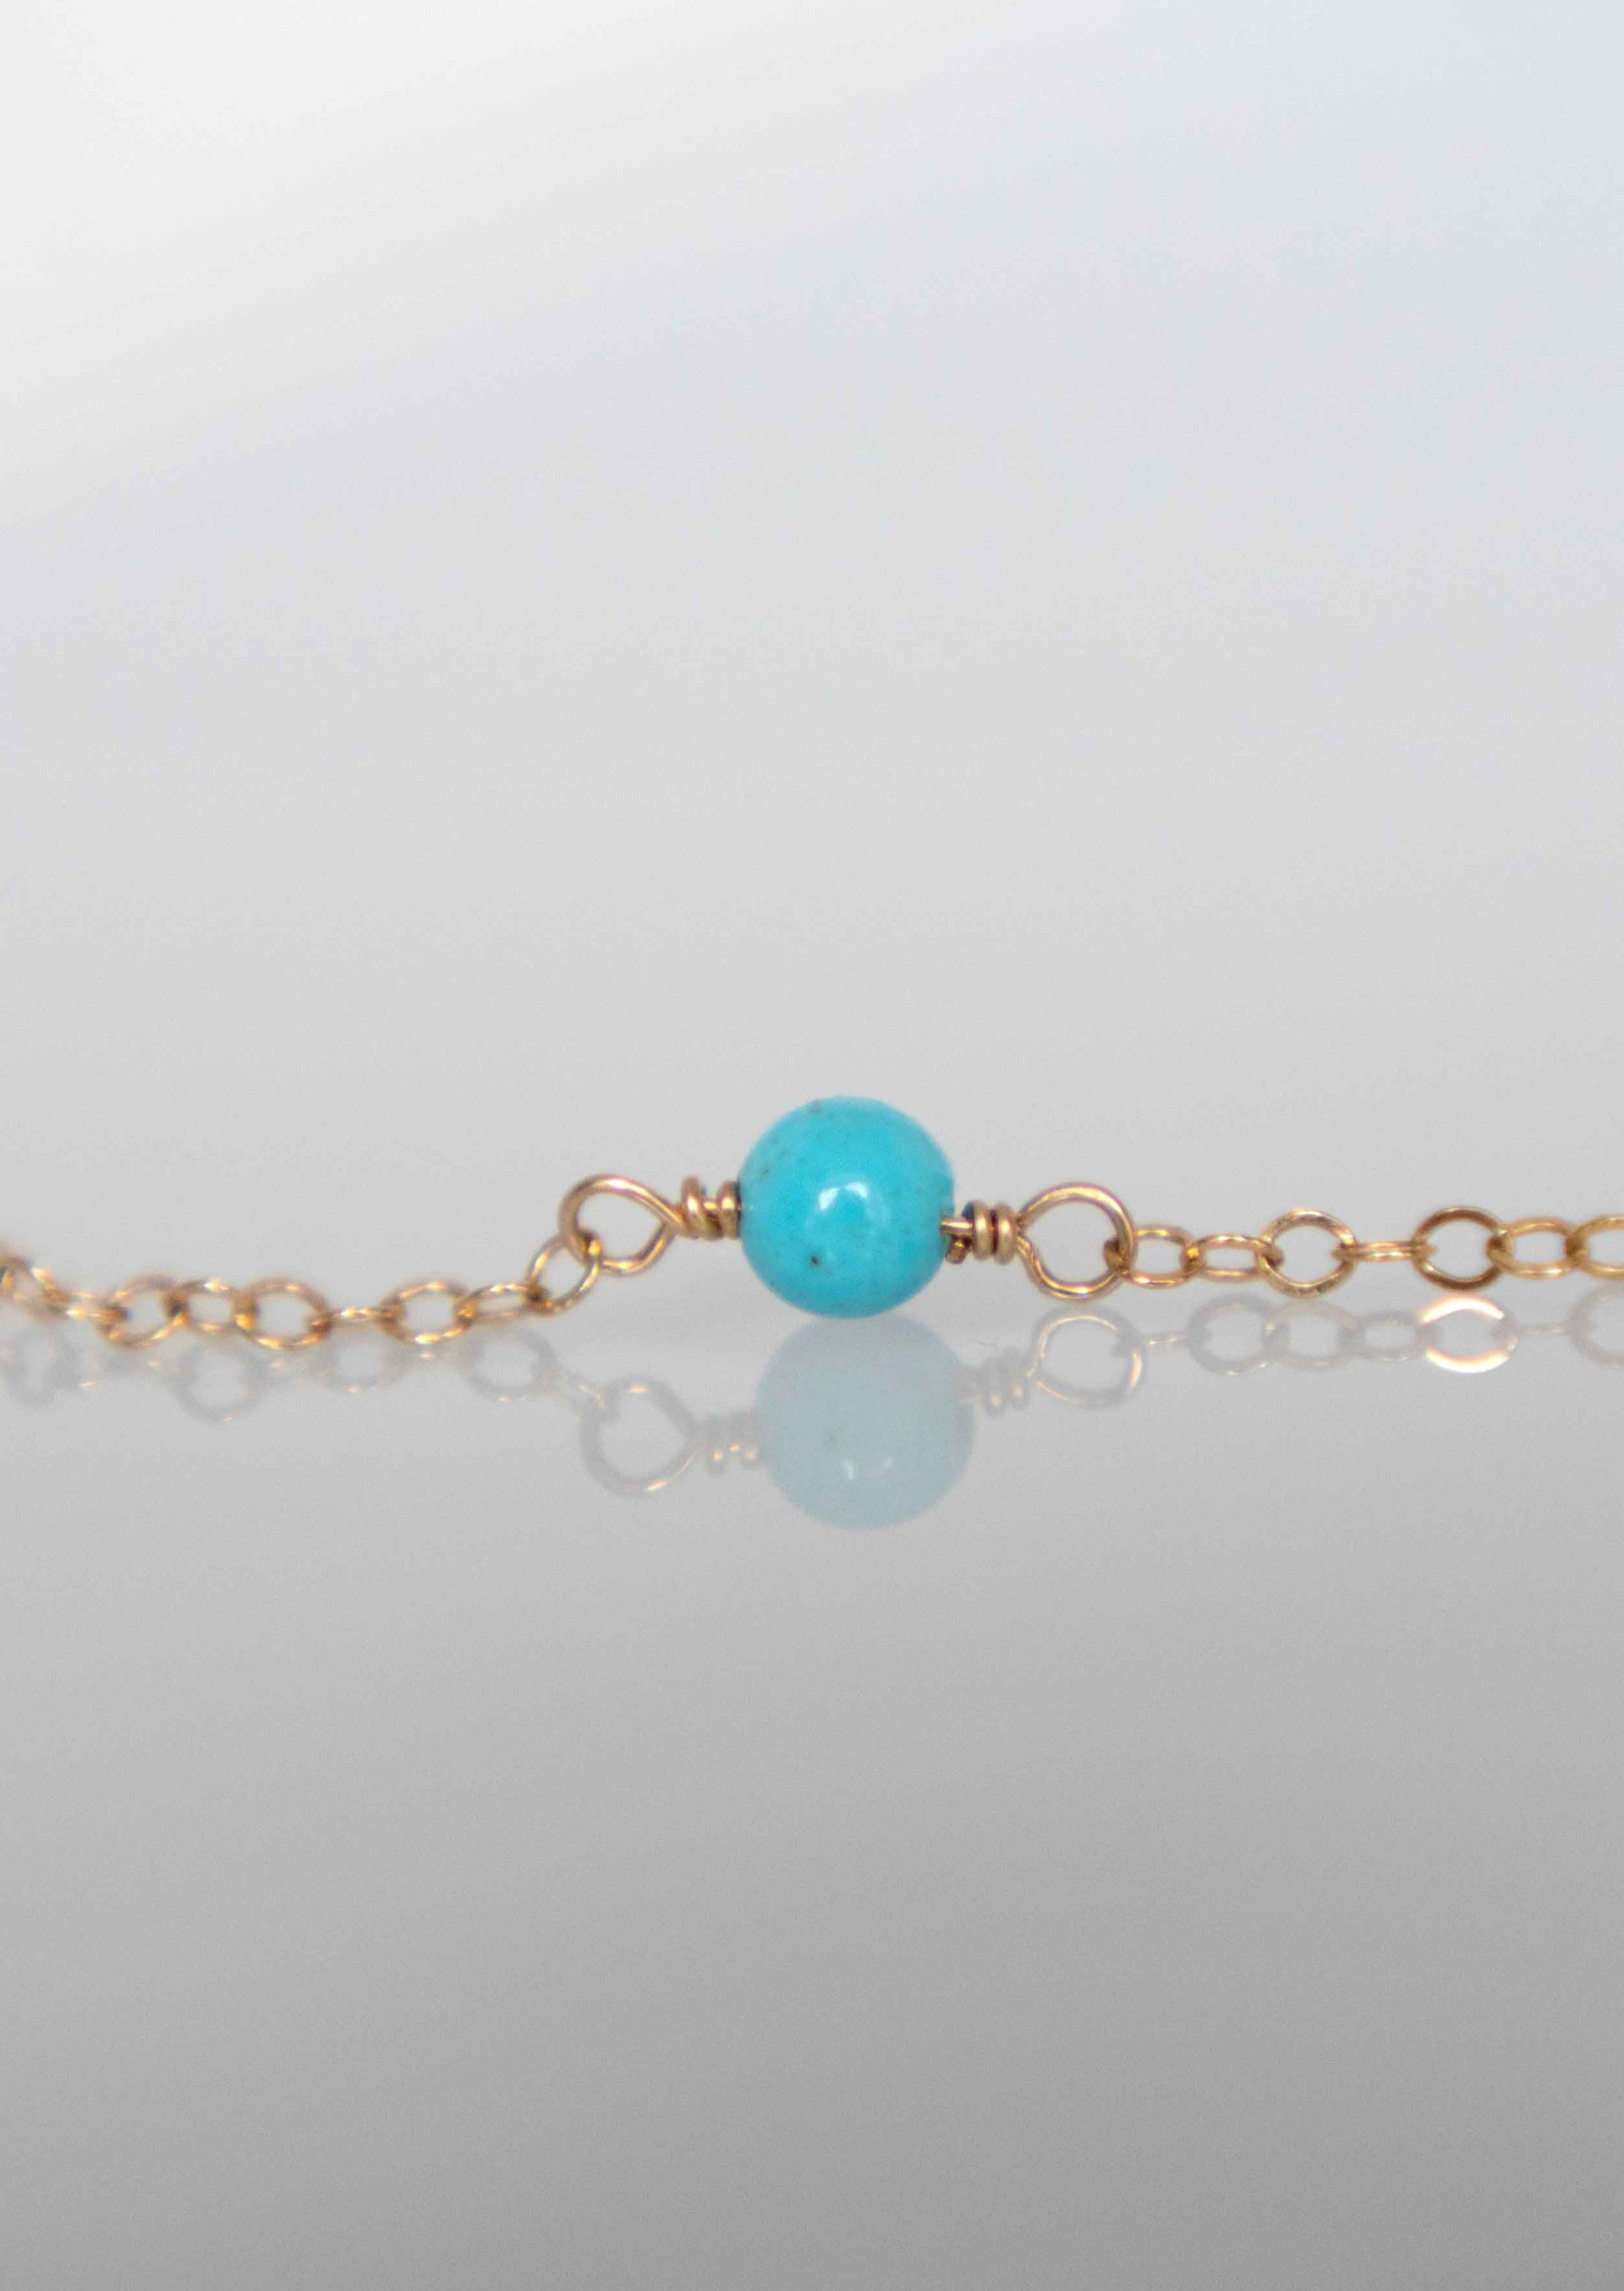 Natural Turquoise genuine gemstone gold choker necklace for teen girls birthday best friend sister gifts